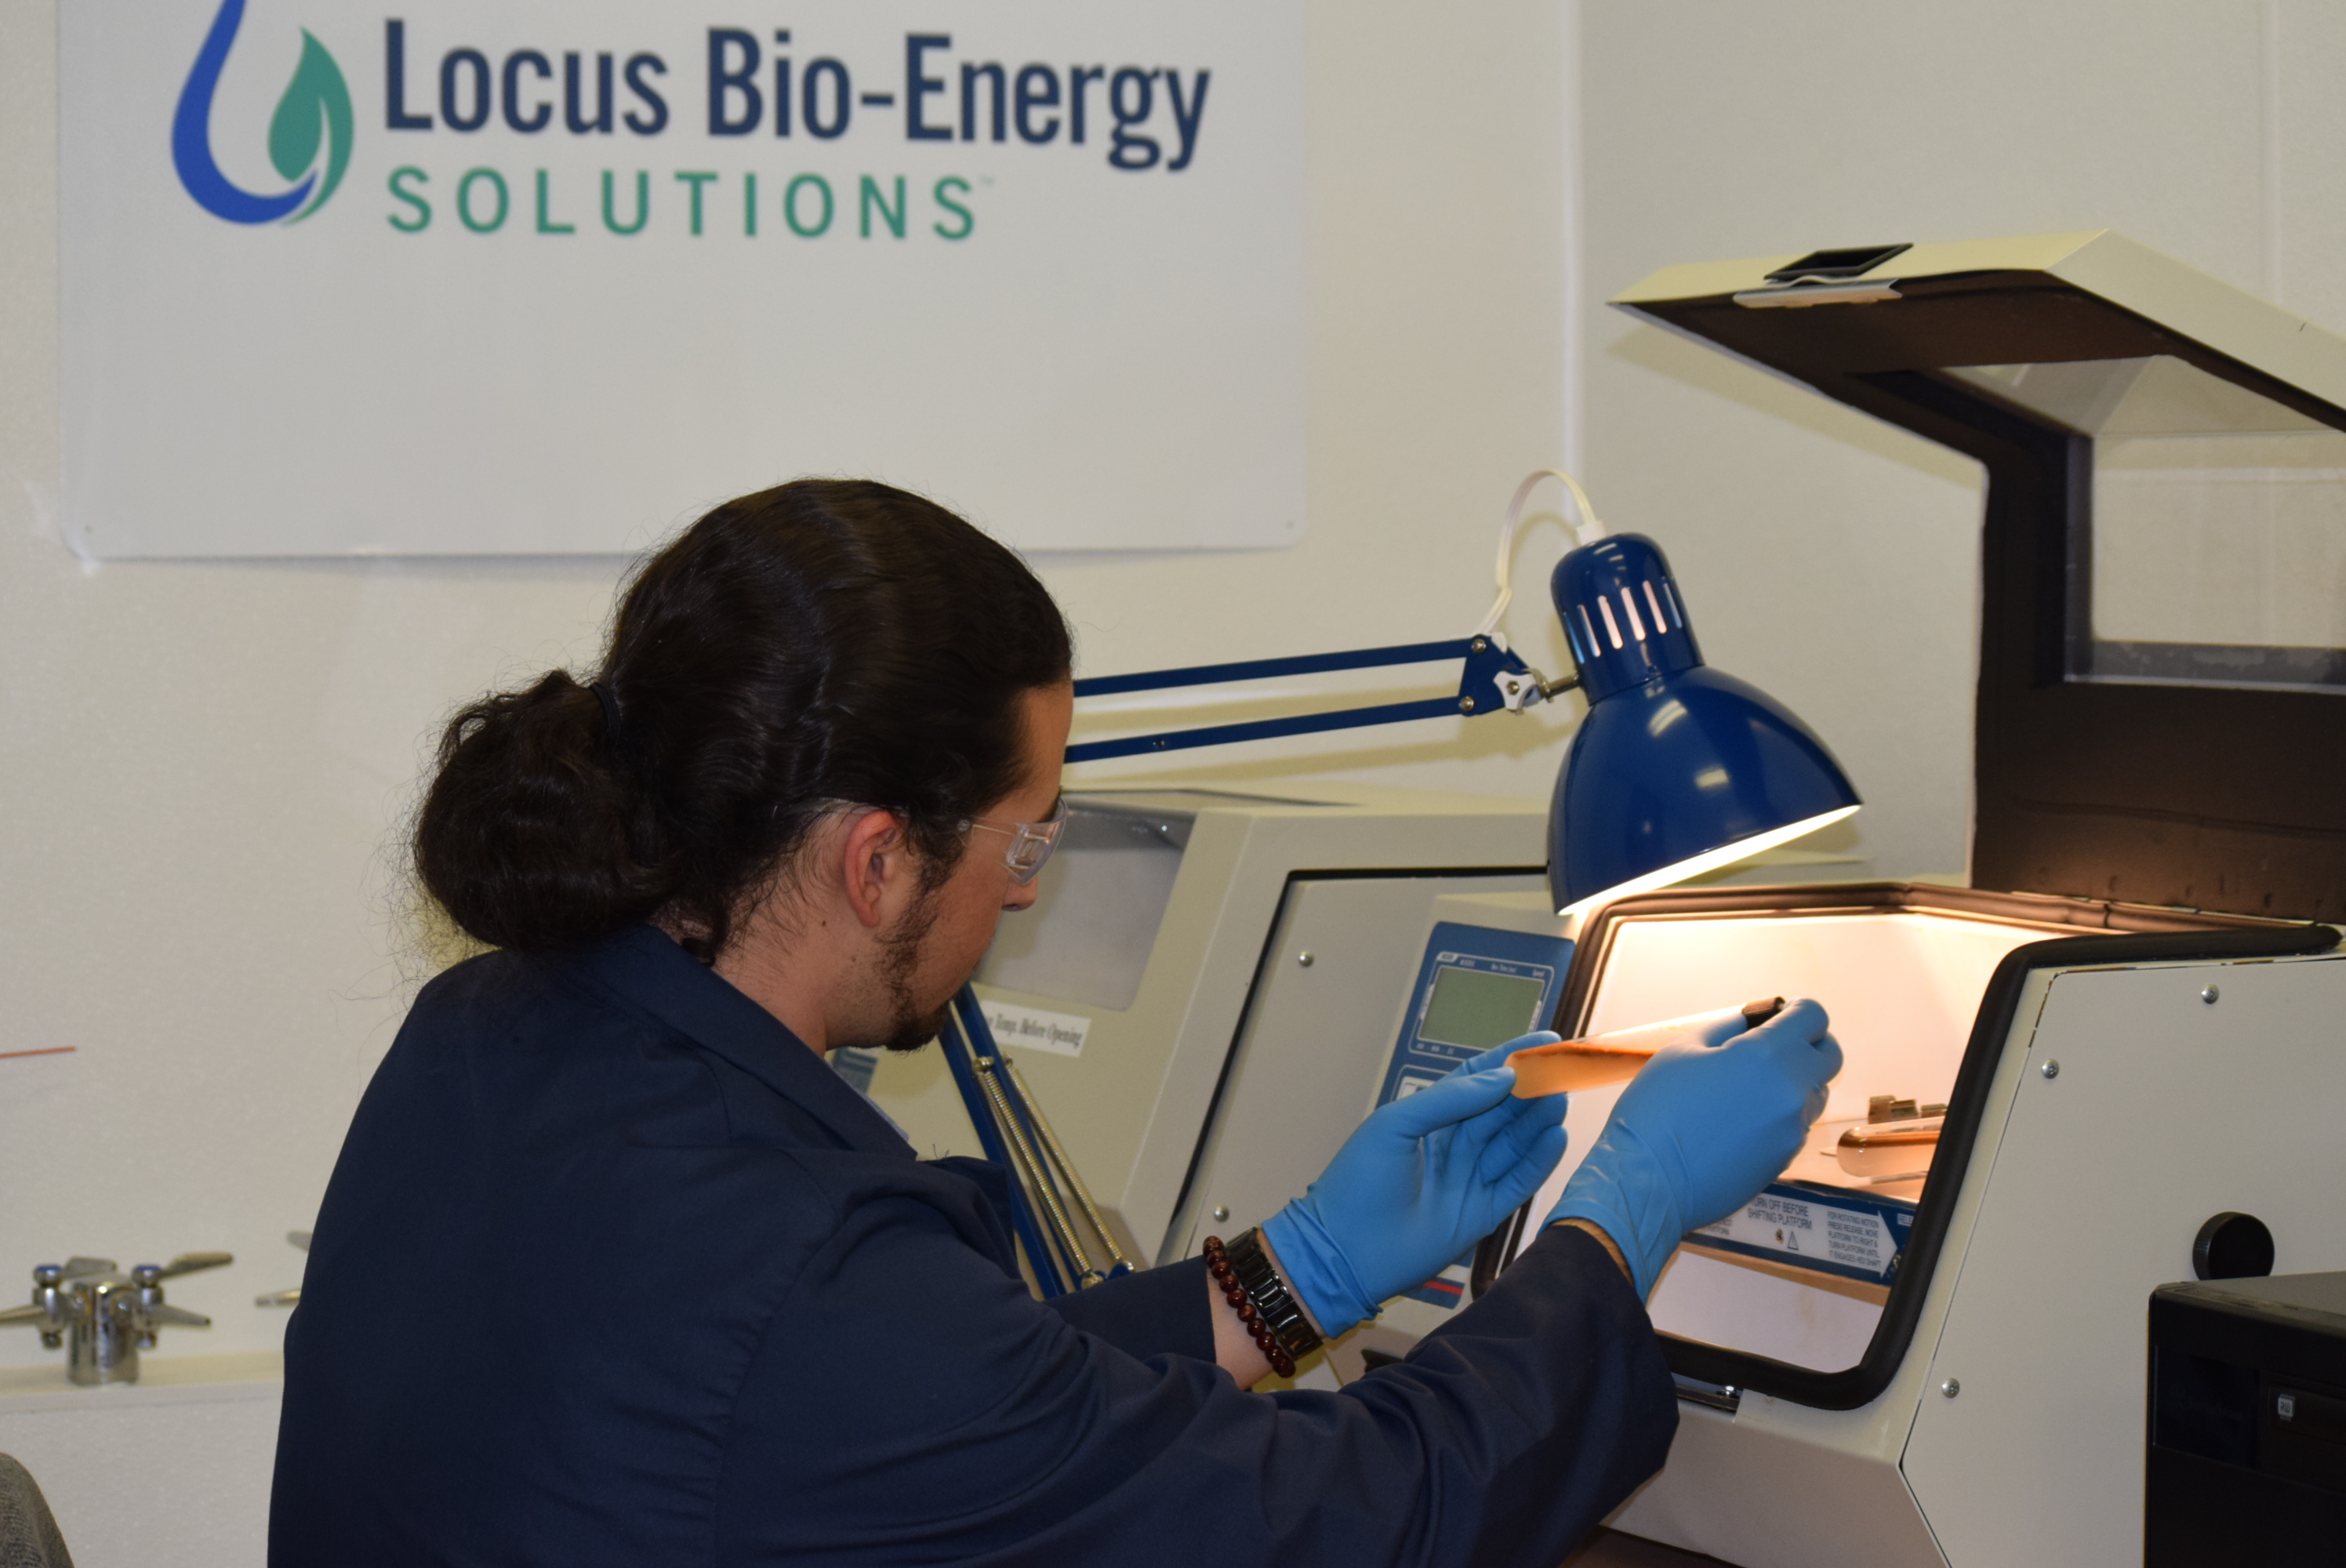 Locus Bio-Energy Solutions developed the first technology allowing biosurfactants to be made in the quantities and cost-effective price points required for the oil industry. (Source: Locus Bio-Energy Solutions)